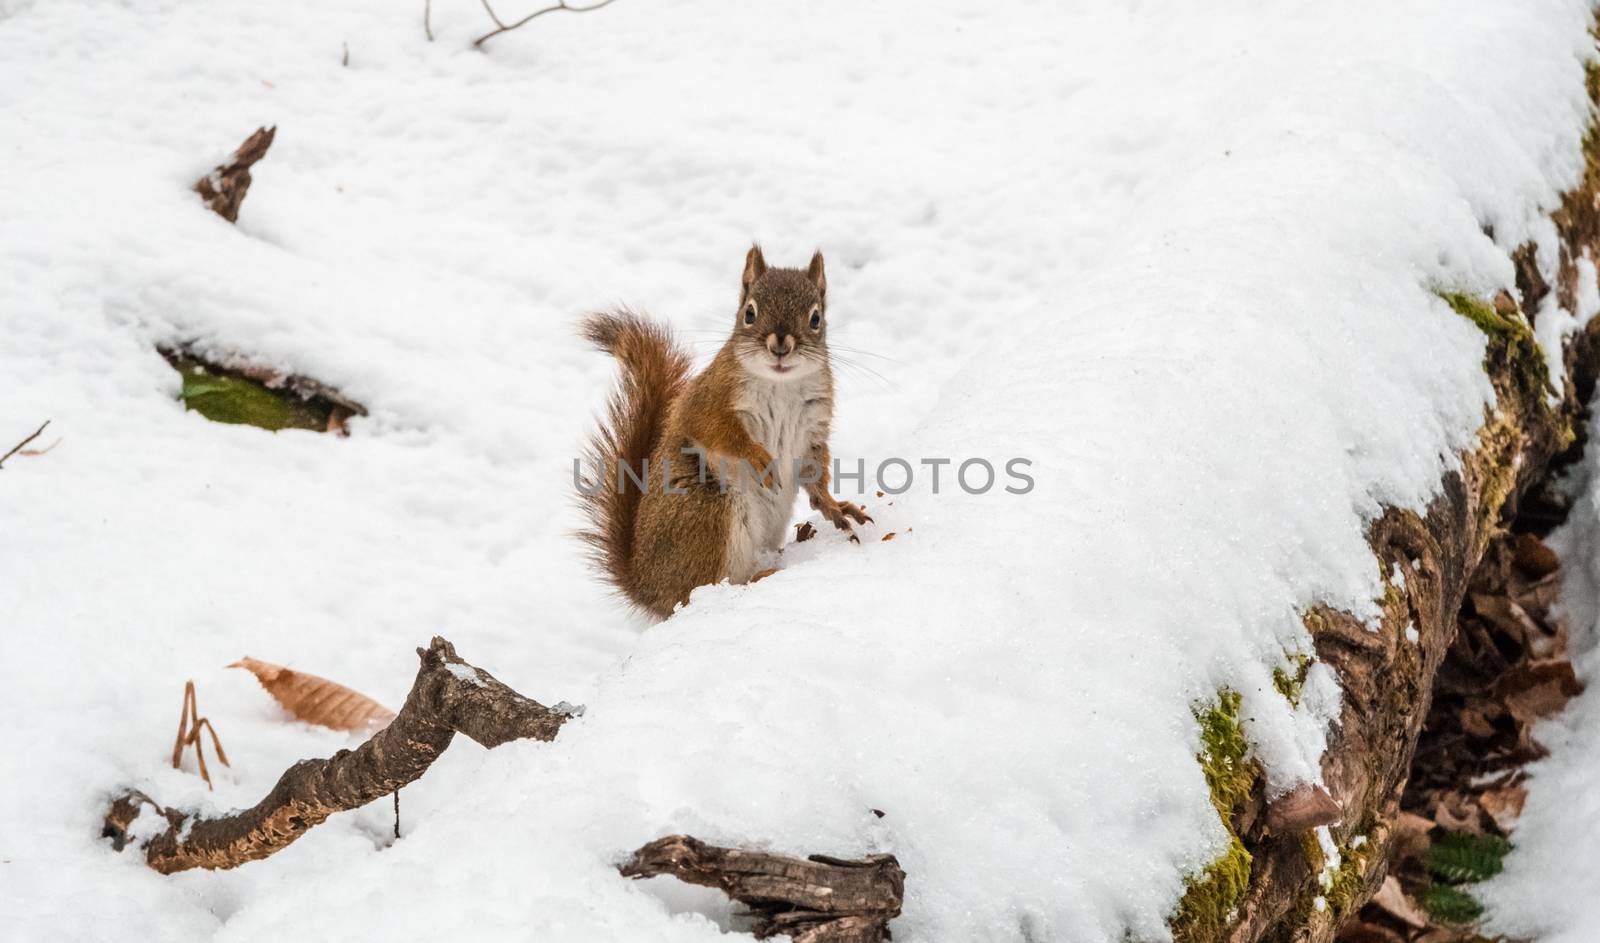 Canadian red squirrel looking directly at the camera while eating on a dead tree trunk covered with snow in winter.